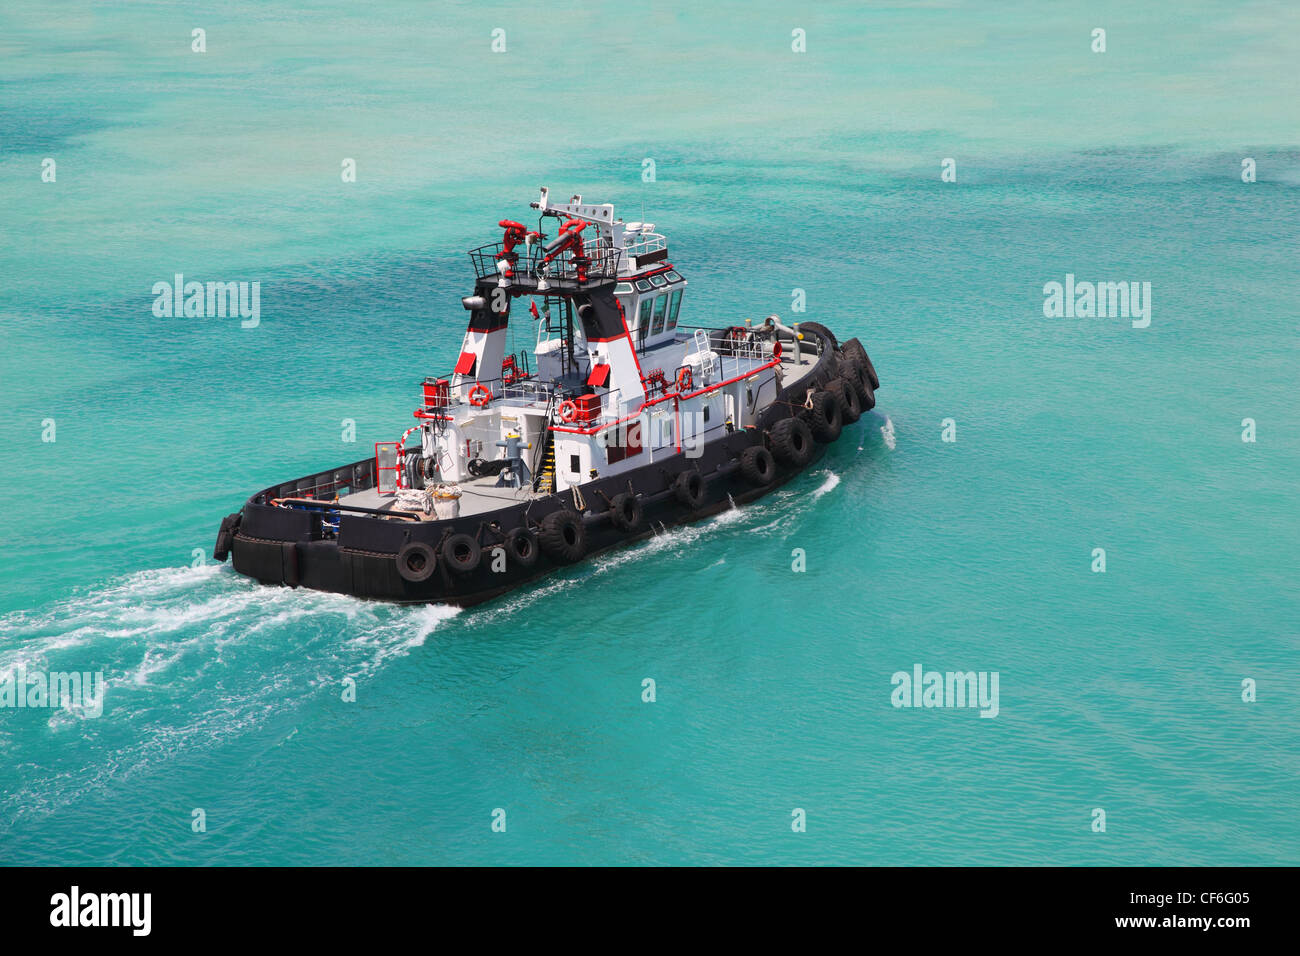 Pilot on little fire pusher tug drift through the sea at day Stock Photo